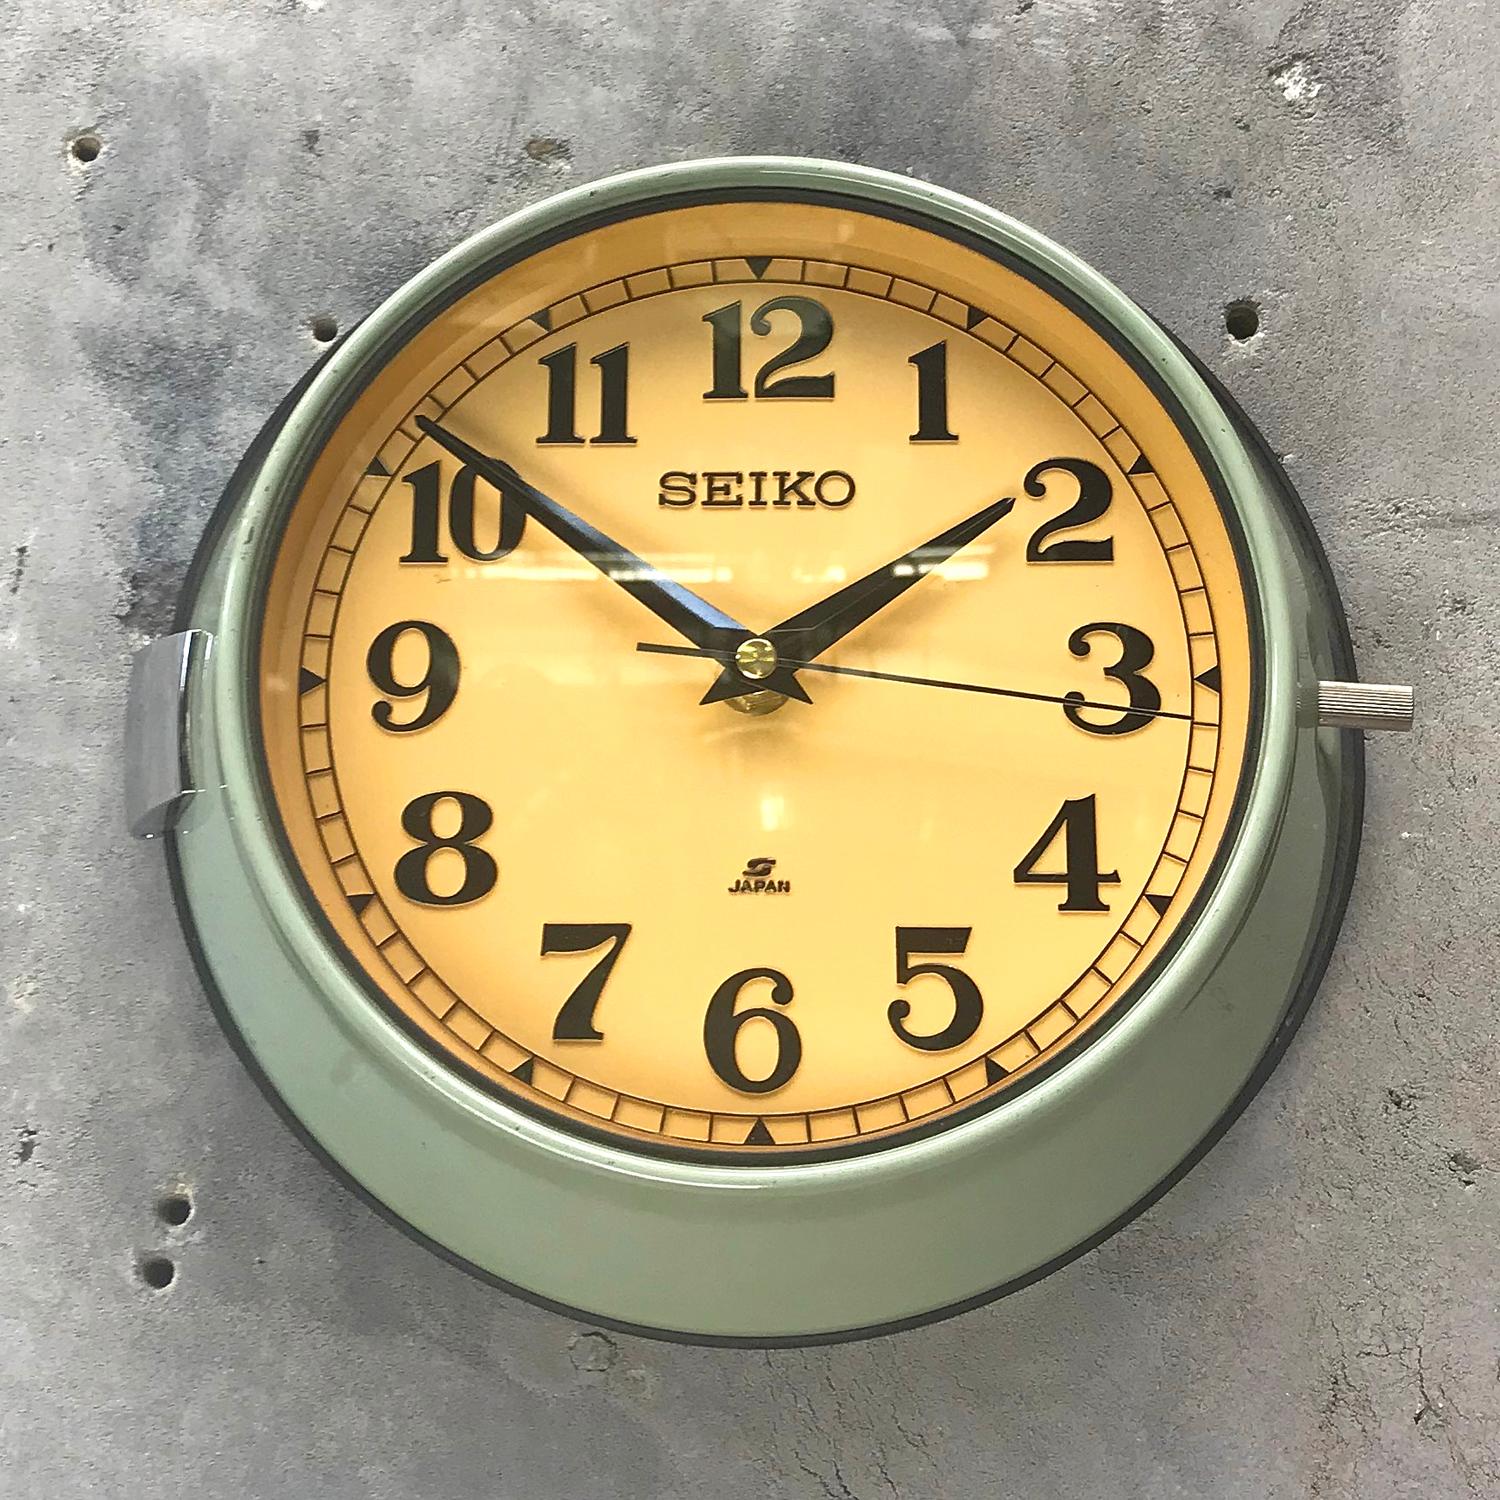 Seiko supertanker slave clock original aqua marine green finish

A reclaimed and restored maritime slave clock.

These clocks were used in great numbers on super tankers, cargo ships and military vessels built during the 1970s and housed a movement